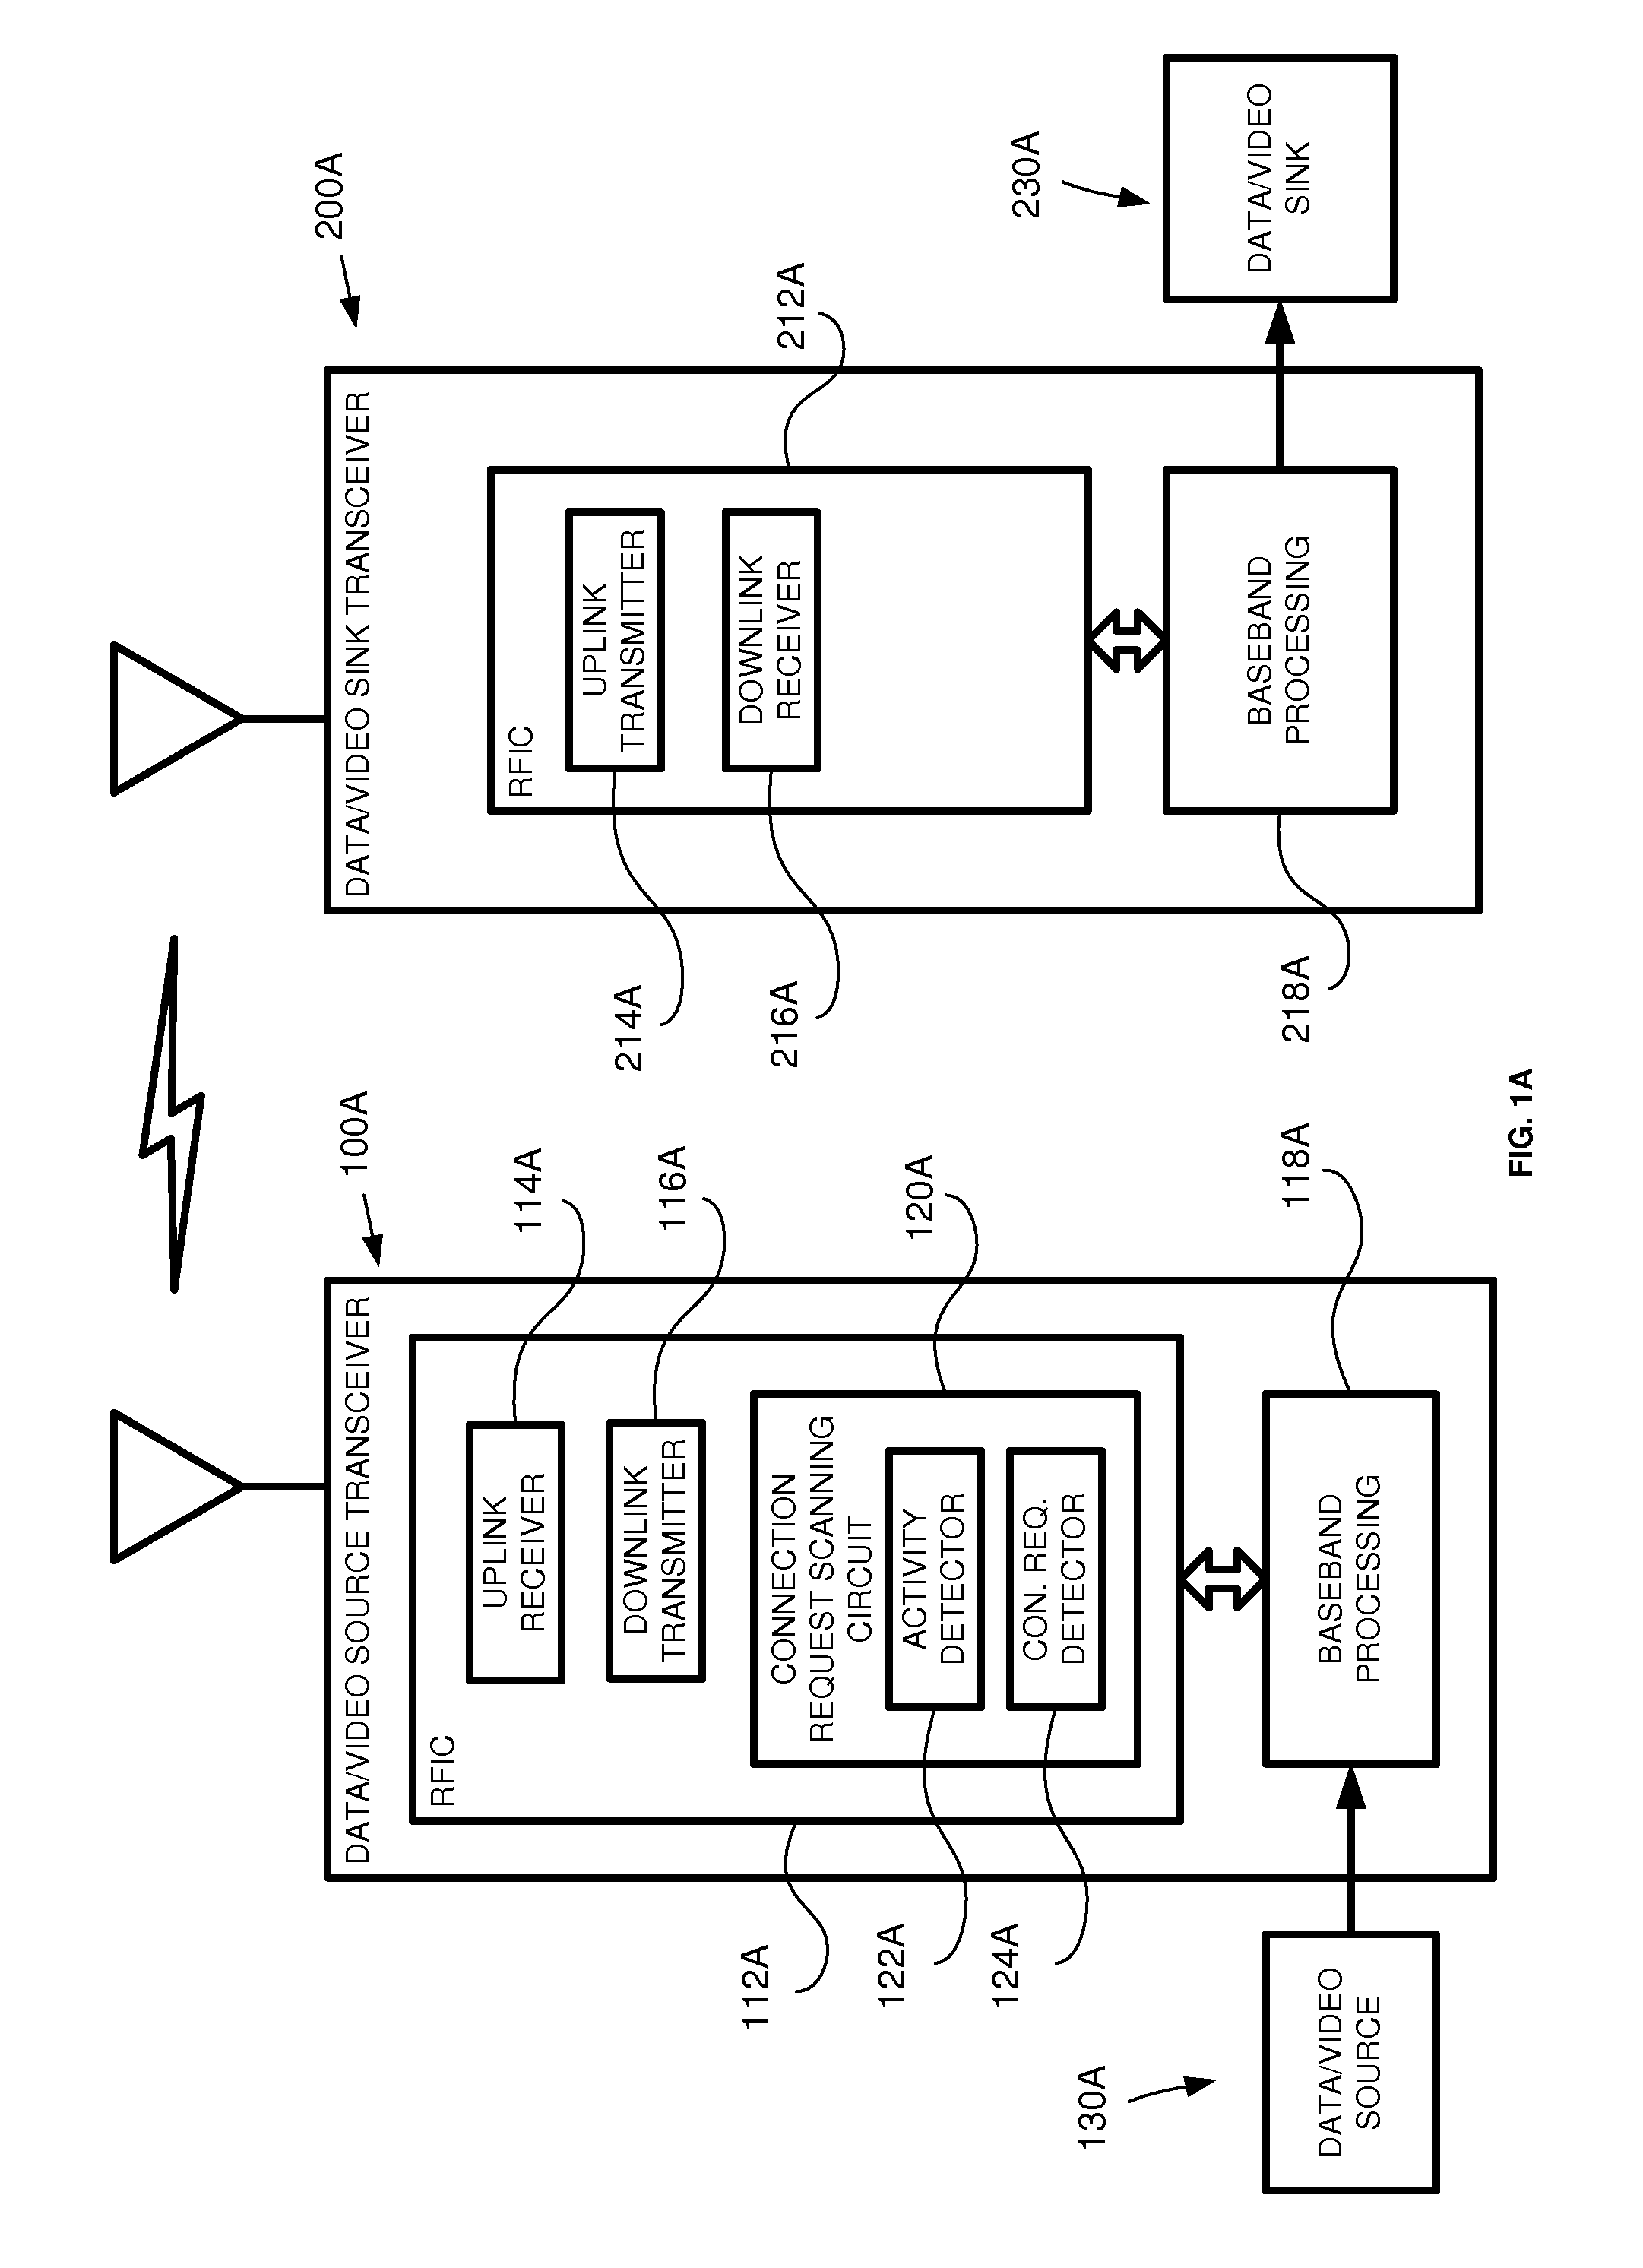 Method circuit and system for detecting a connection request while maintaining a low power mode